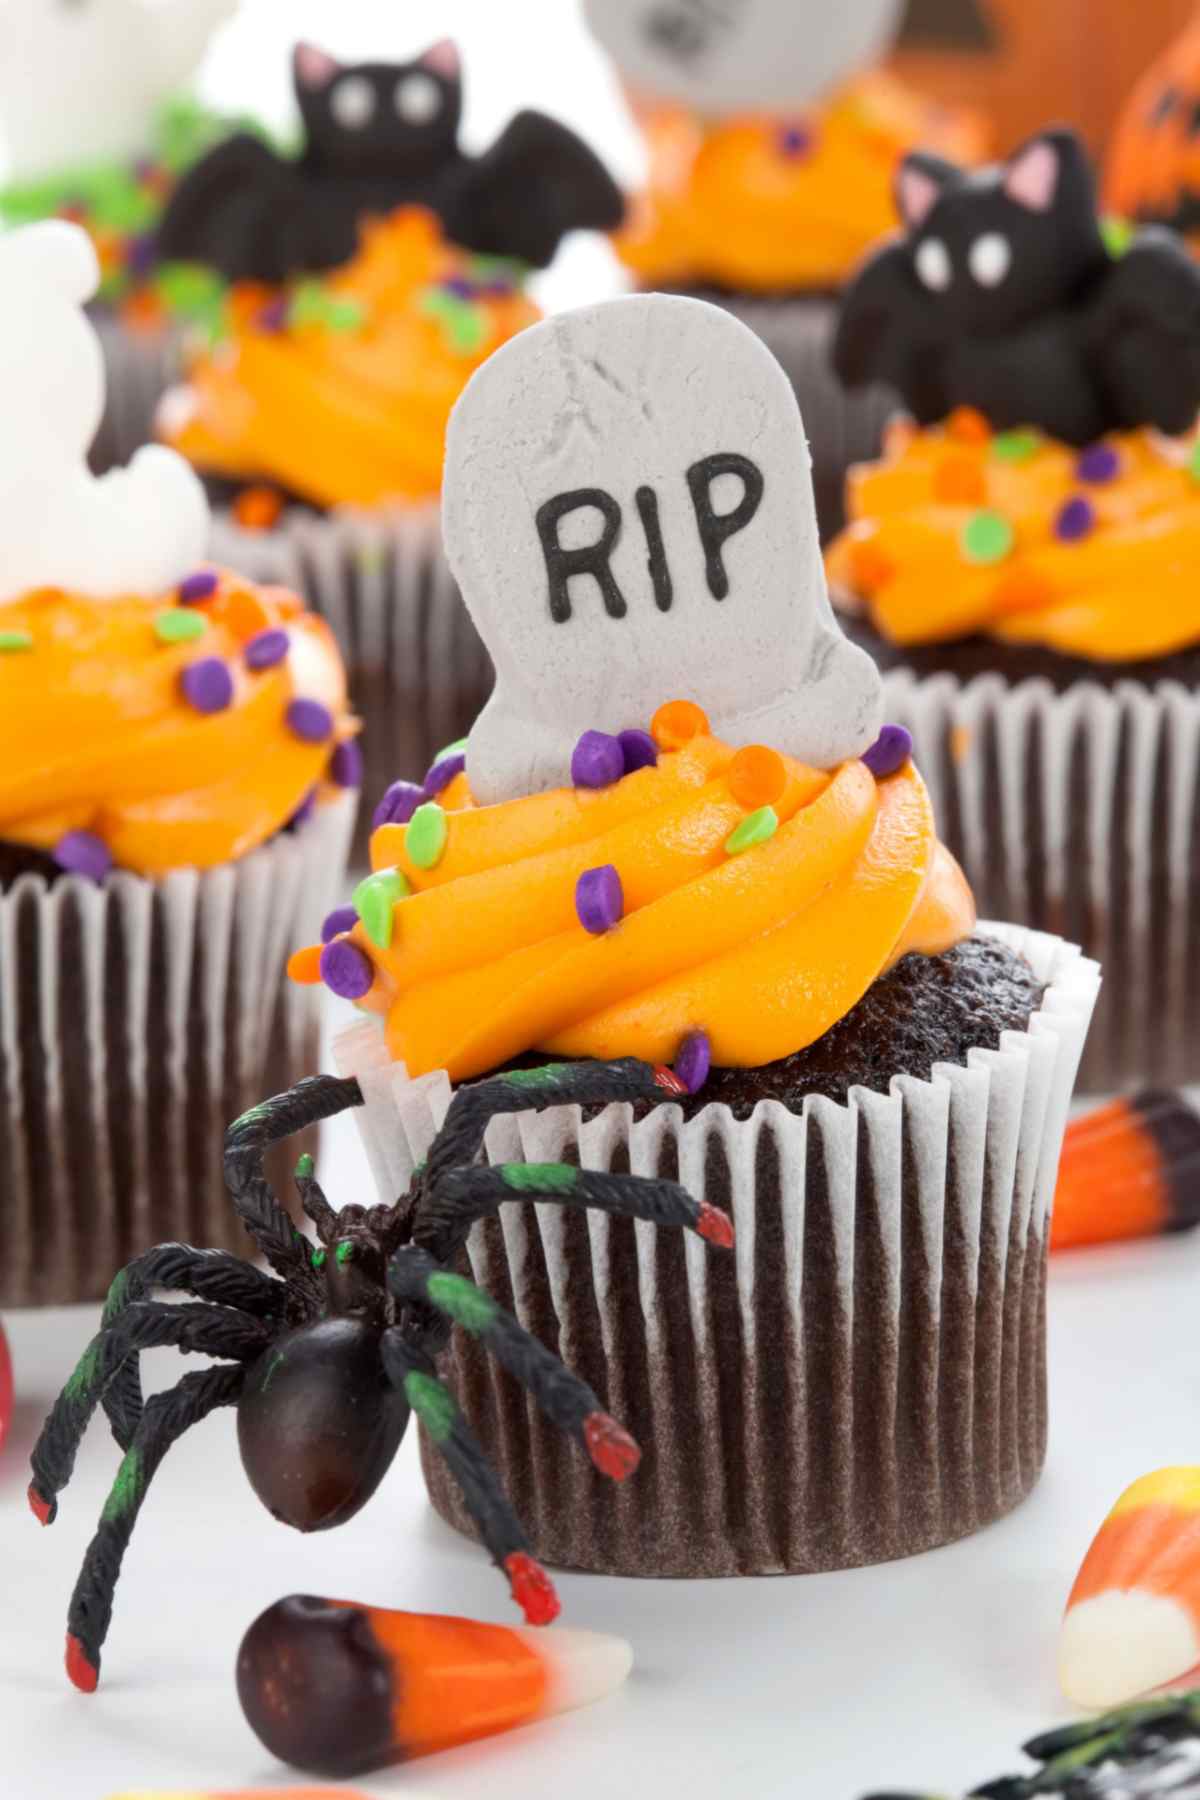 Chocolate halloween cupcakes with orange frosting and sprinkles, topped with edible bats and gravestones.